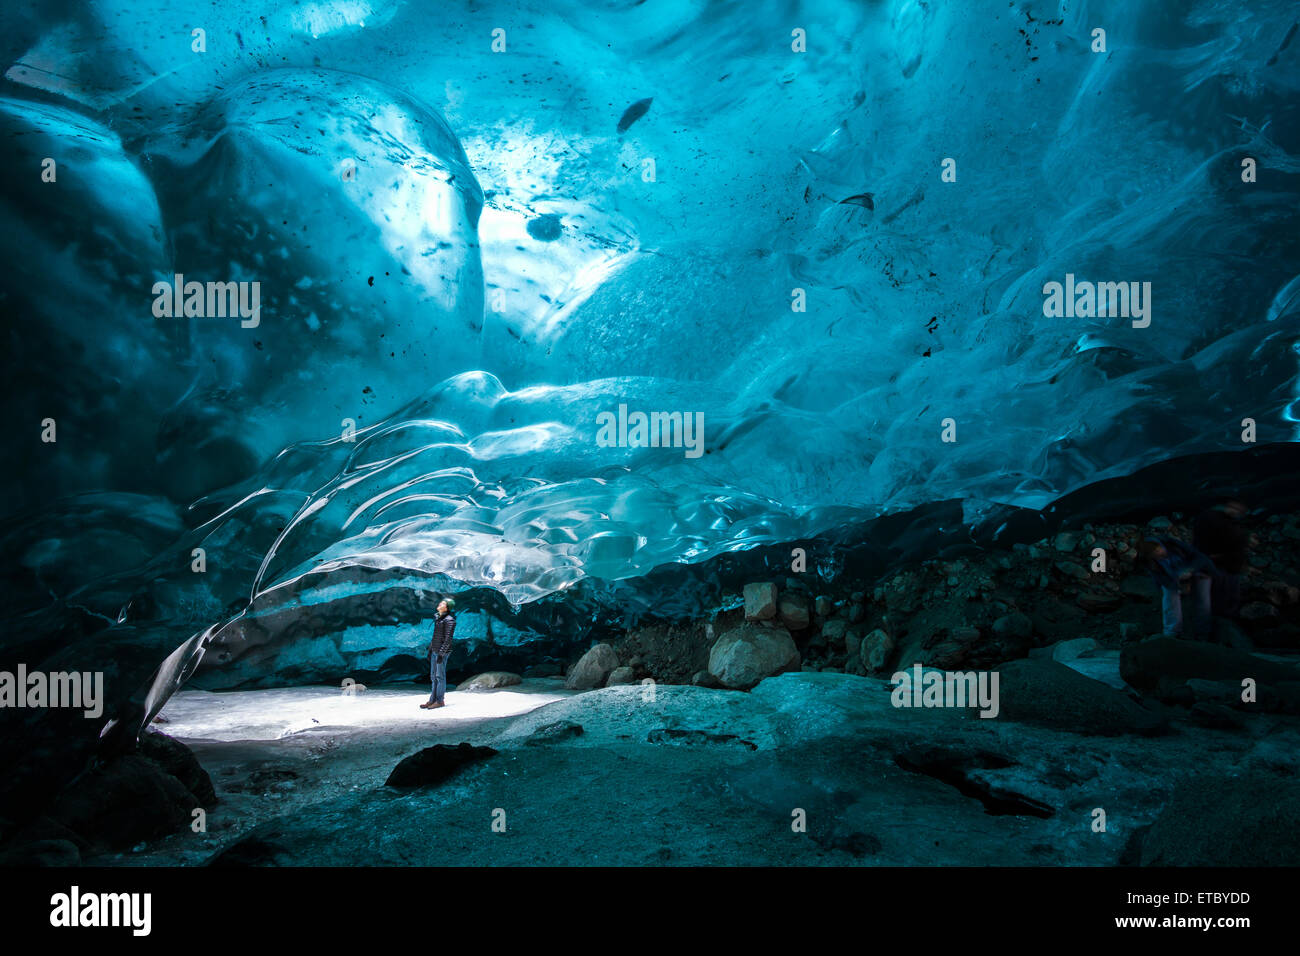 A man gazes up from an ice cave within the Mendenhall glacier, Southeast Alaska Stock Photo